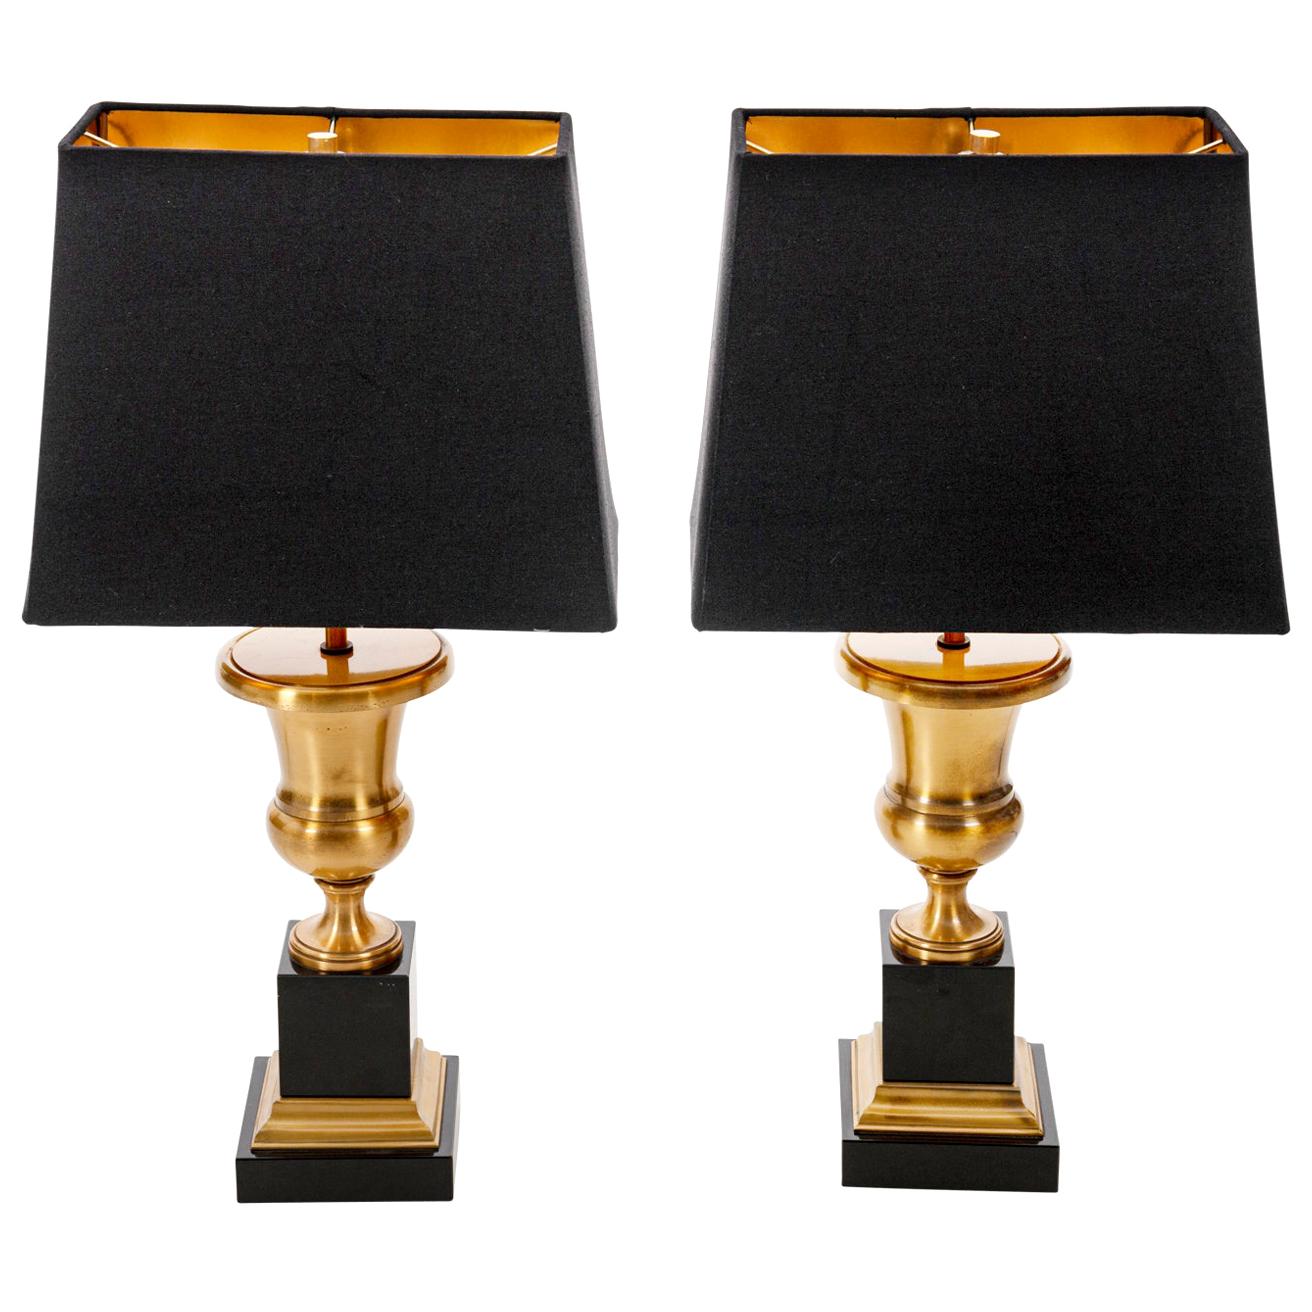 Pair of Gold and Black Vintage Table Lamps